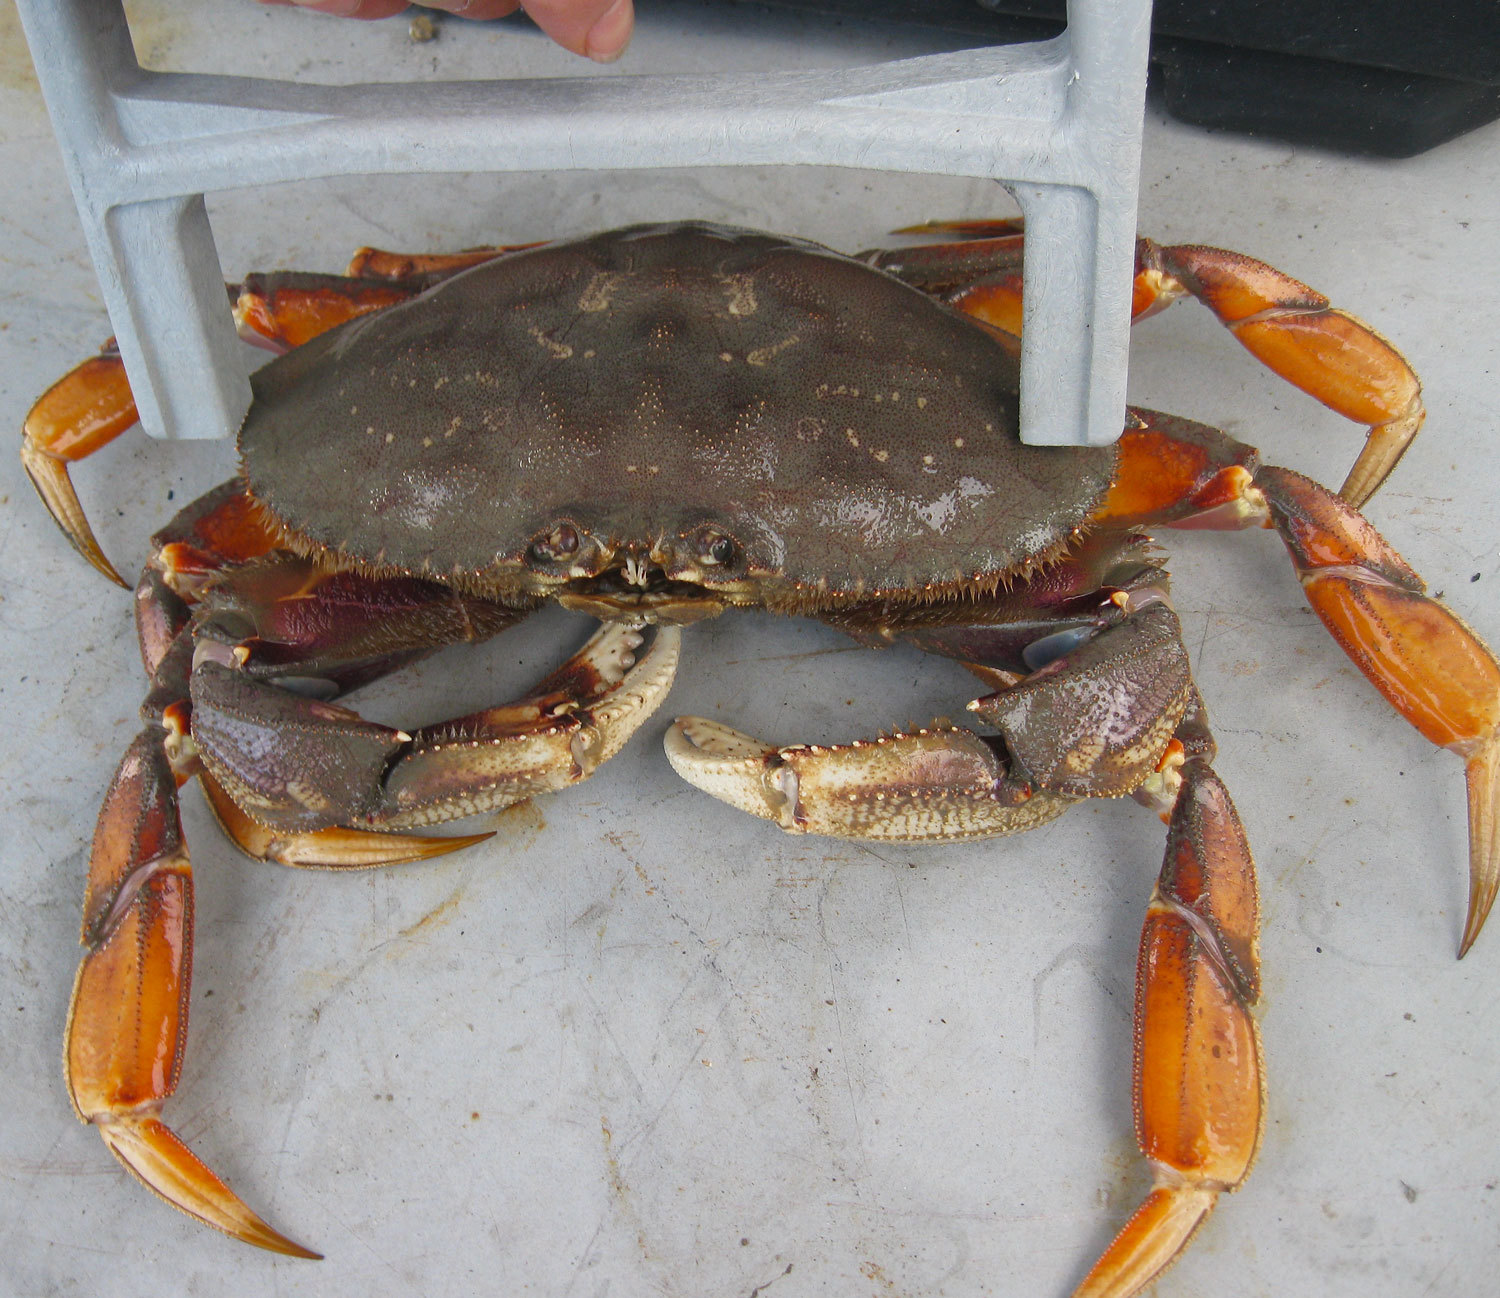 Measuring with the crab caliper